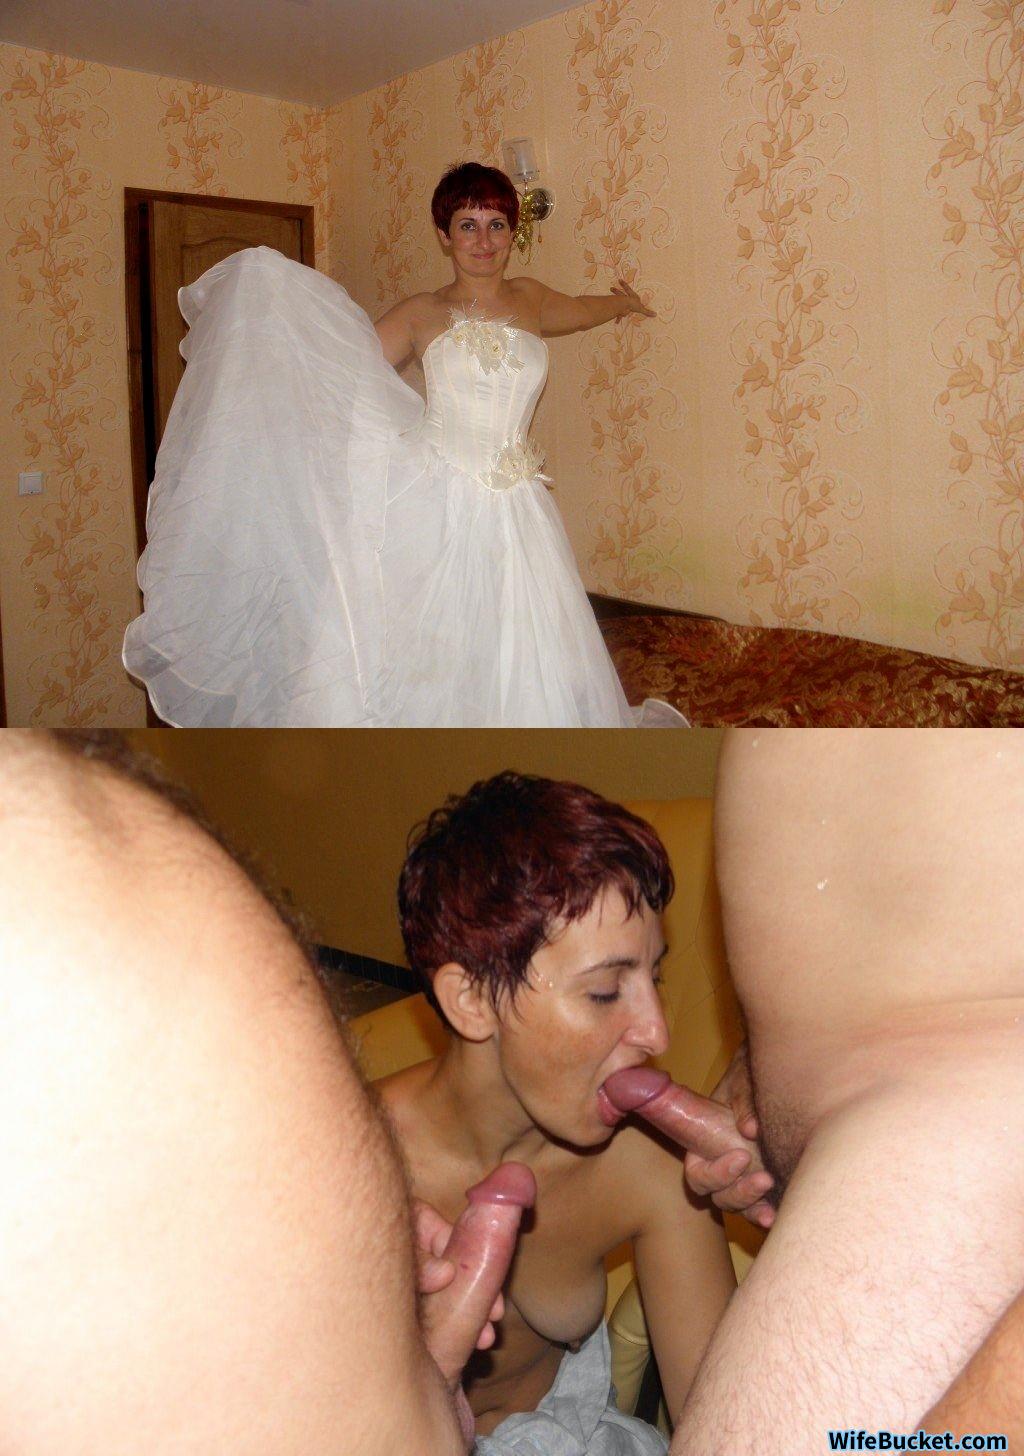 1024px x 1456px - GALLERY] Before-after nudes of real brides! â€“ WifeBucket | Offical MILF Blog